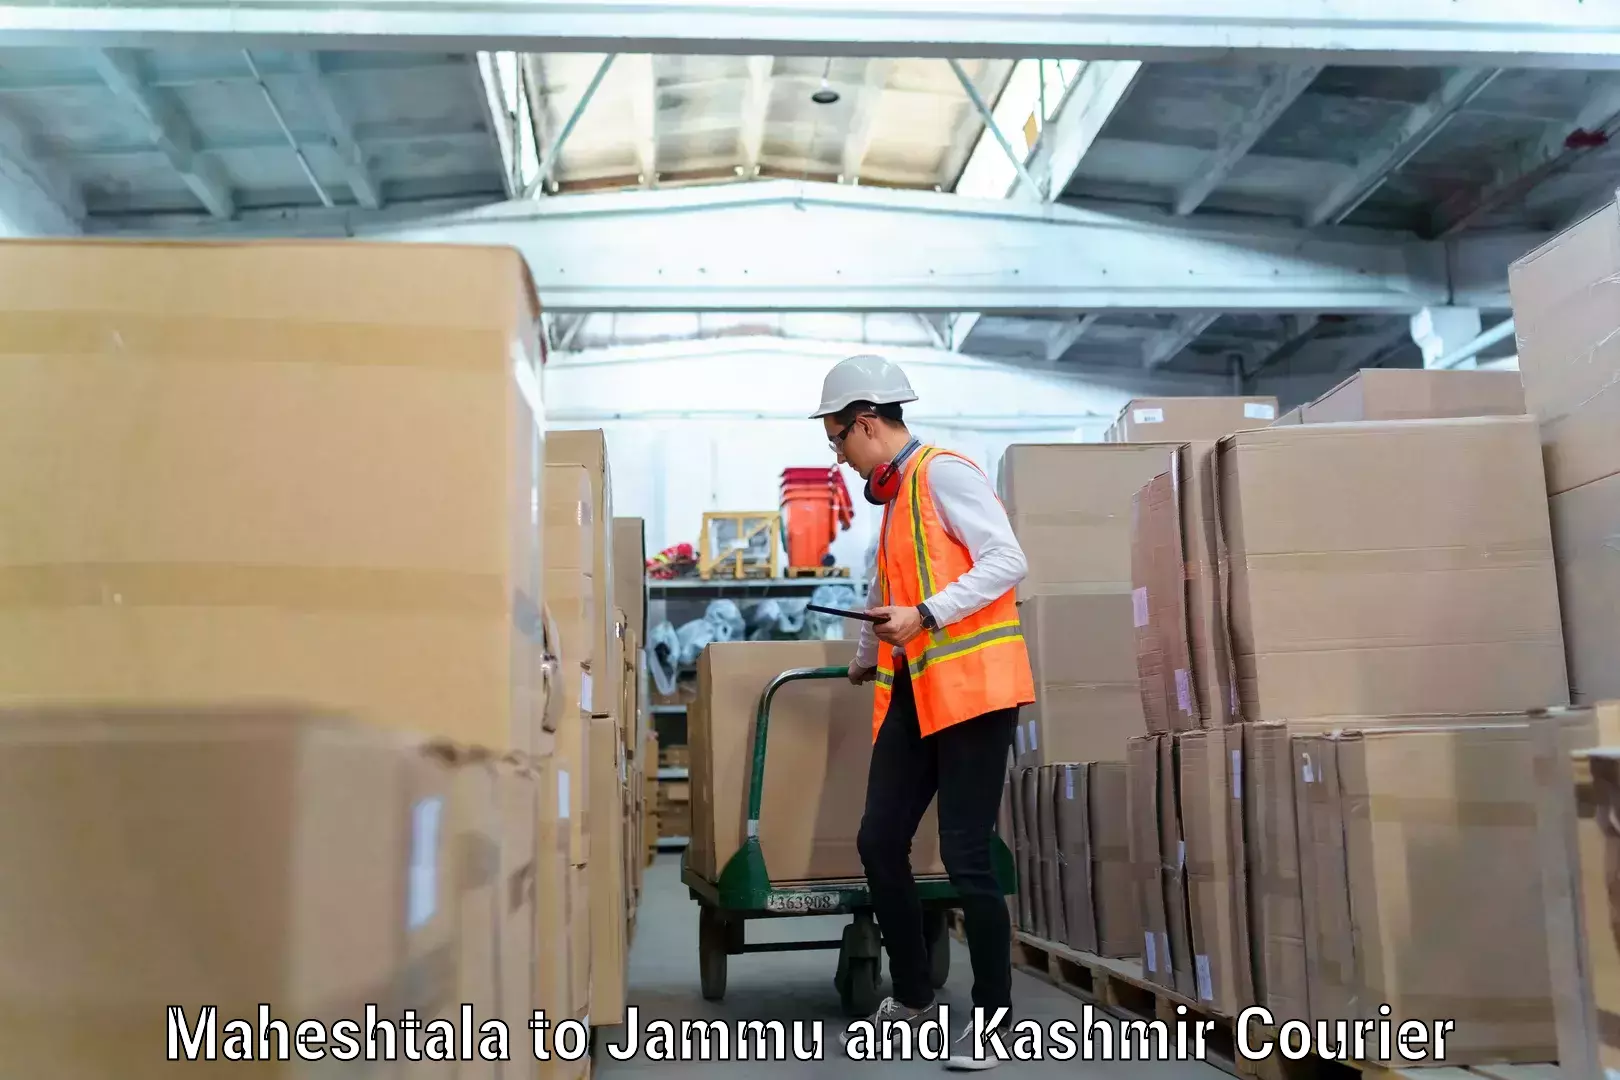 Furniture relocation experts in Maheshtala to Jammu and Kashmir